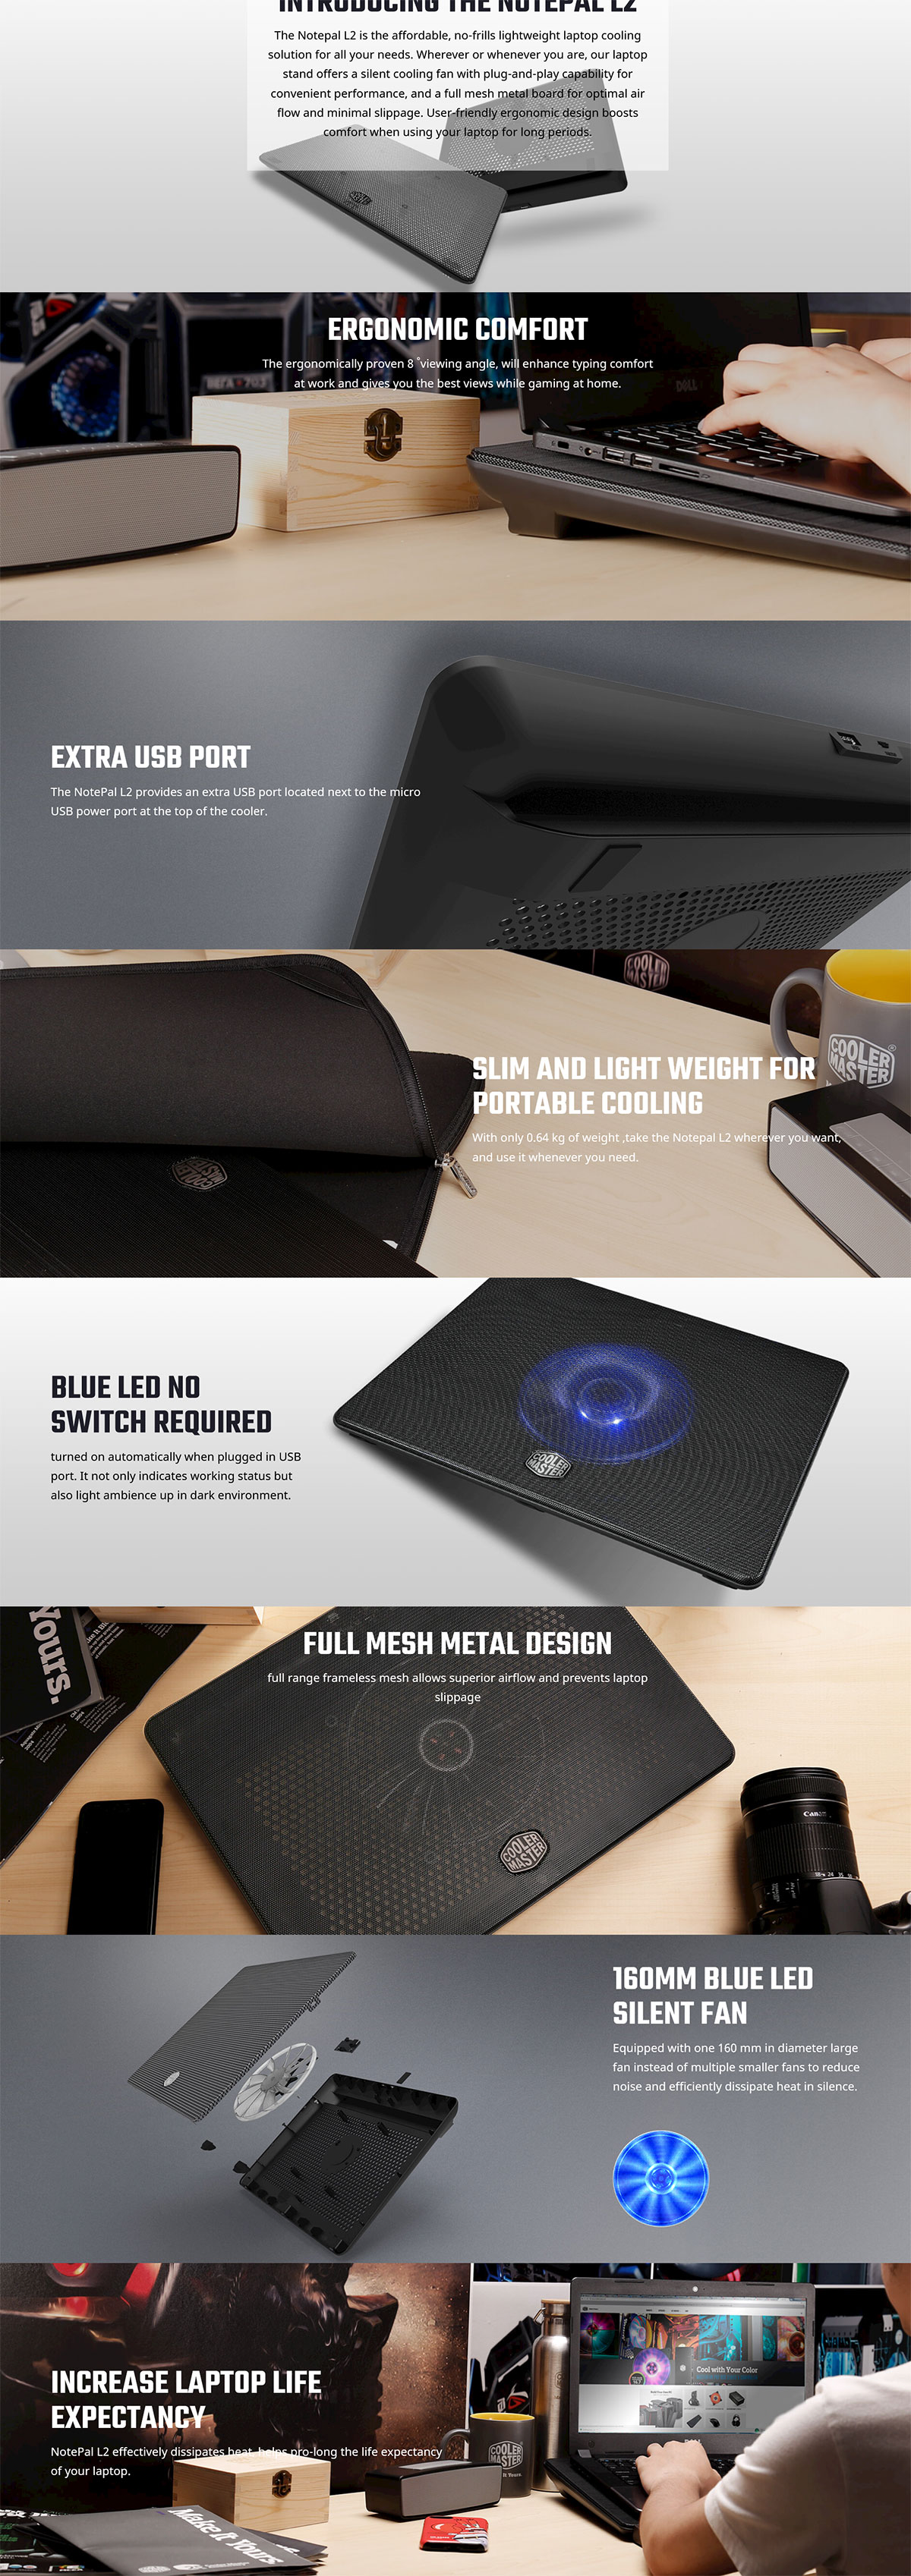 Cooler Master L2 notebook stand MNW-SWTS-14FN-R1 Details